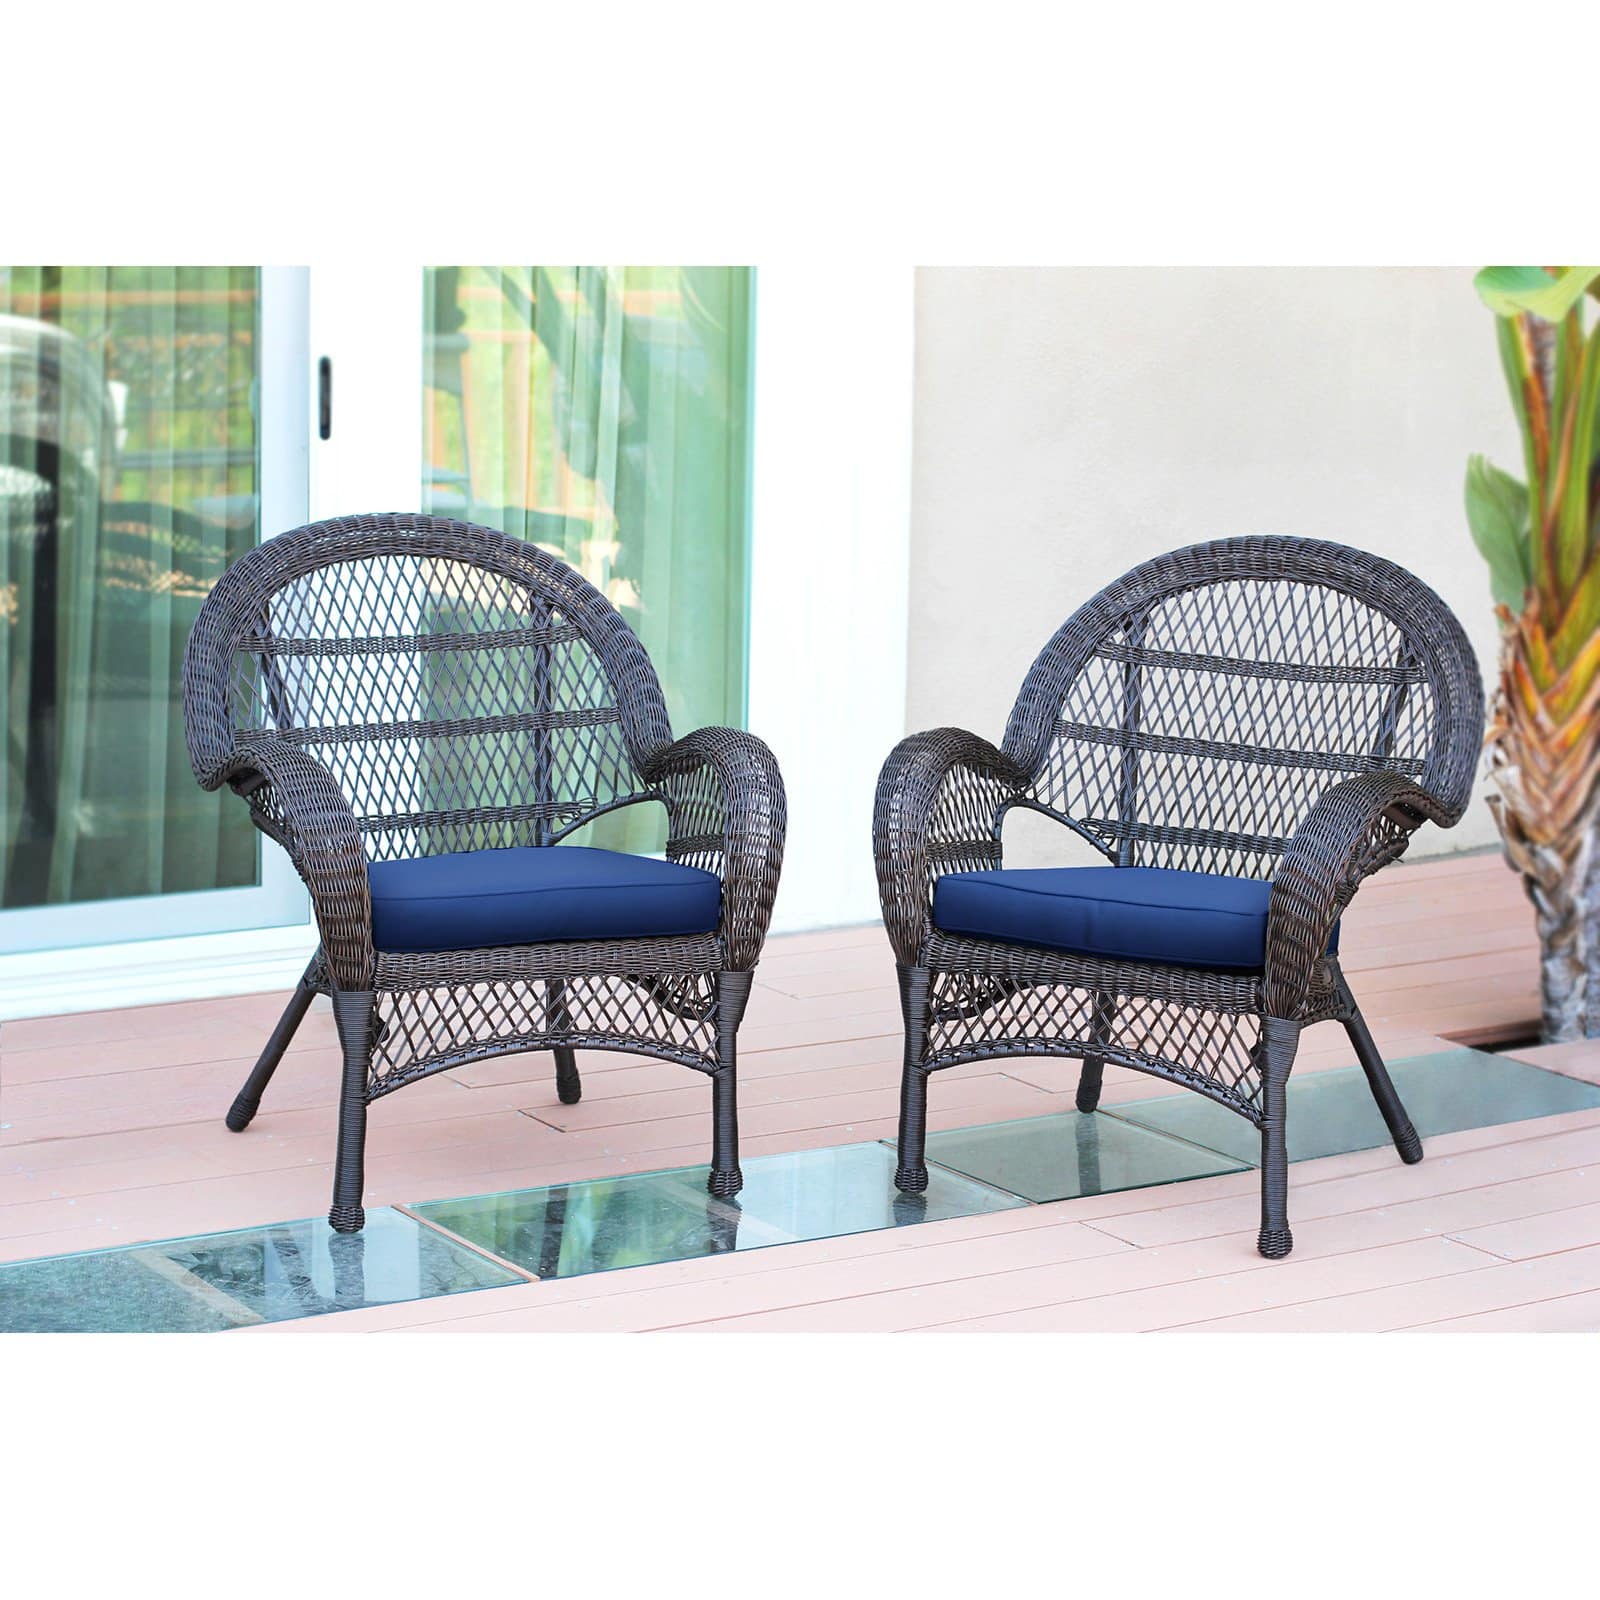 Jeco Wicker Chair in Espresso with Brown Cushion (Set of 4) - image 3 of 11